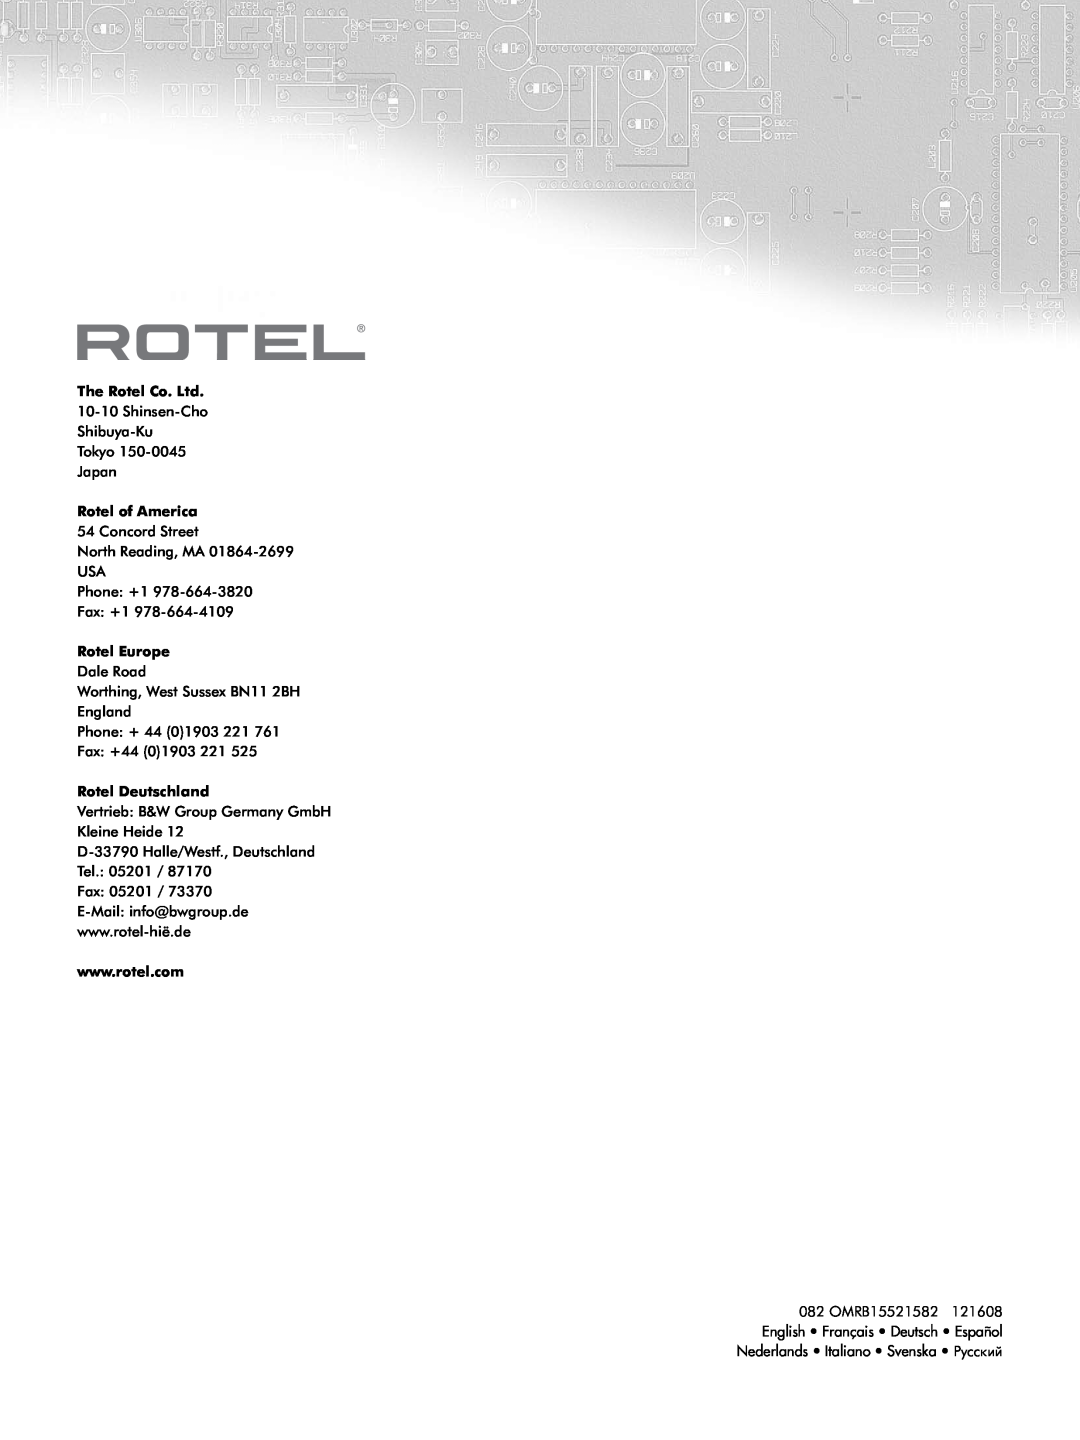 Rotel RB-1552, RB-1582 owner manual Rotel of America, Rotel Europe, Rotel Deutschland 